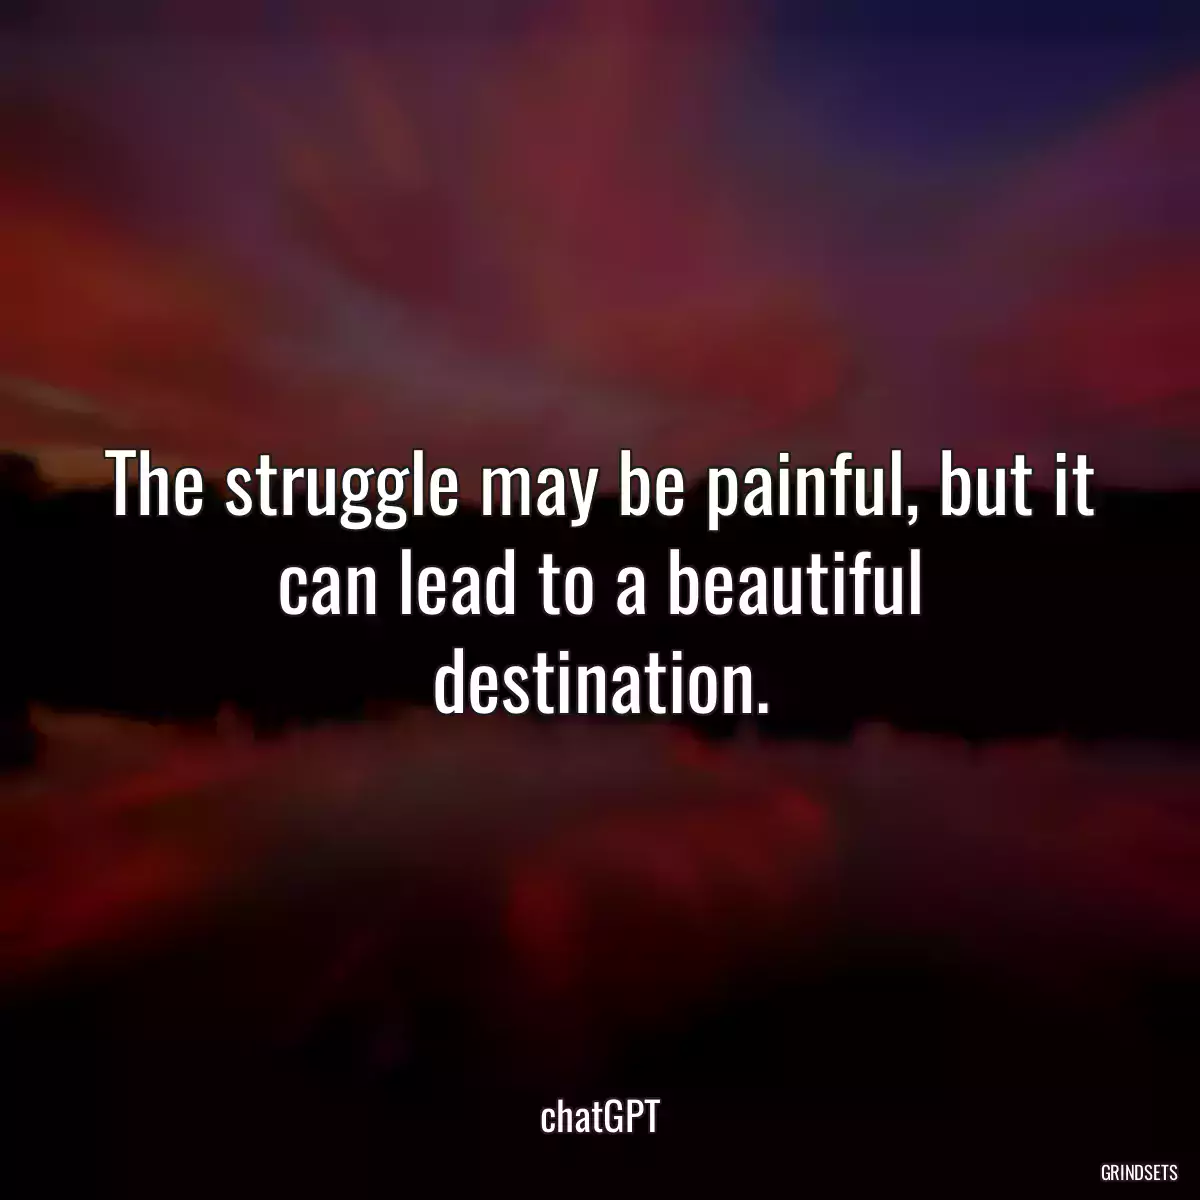 The struggle may be painful, but it can lead to a beautiful destination.